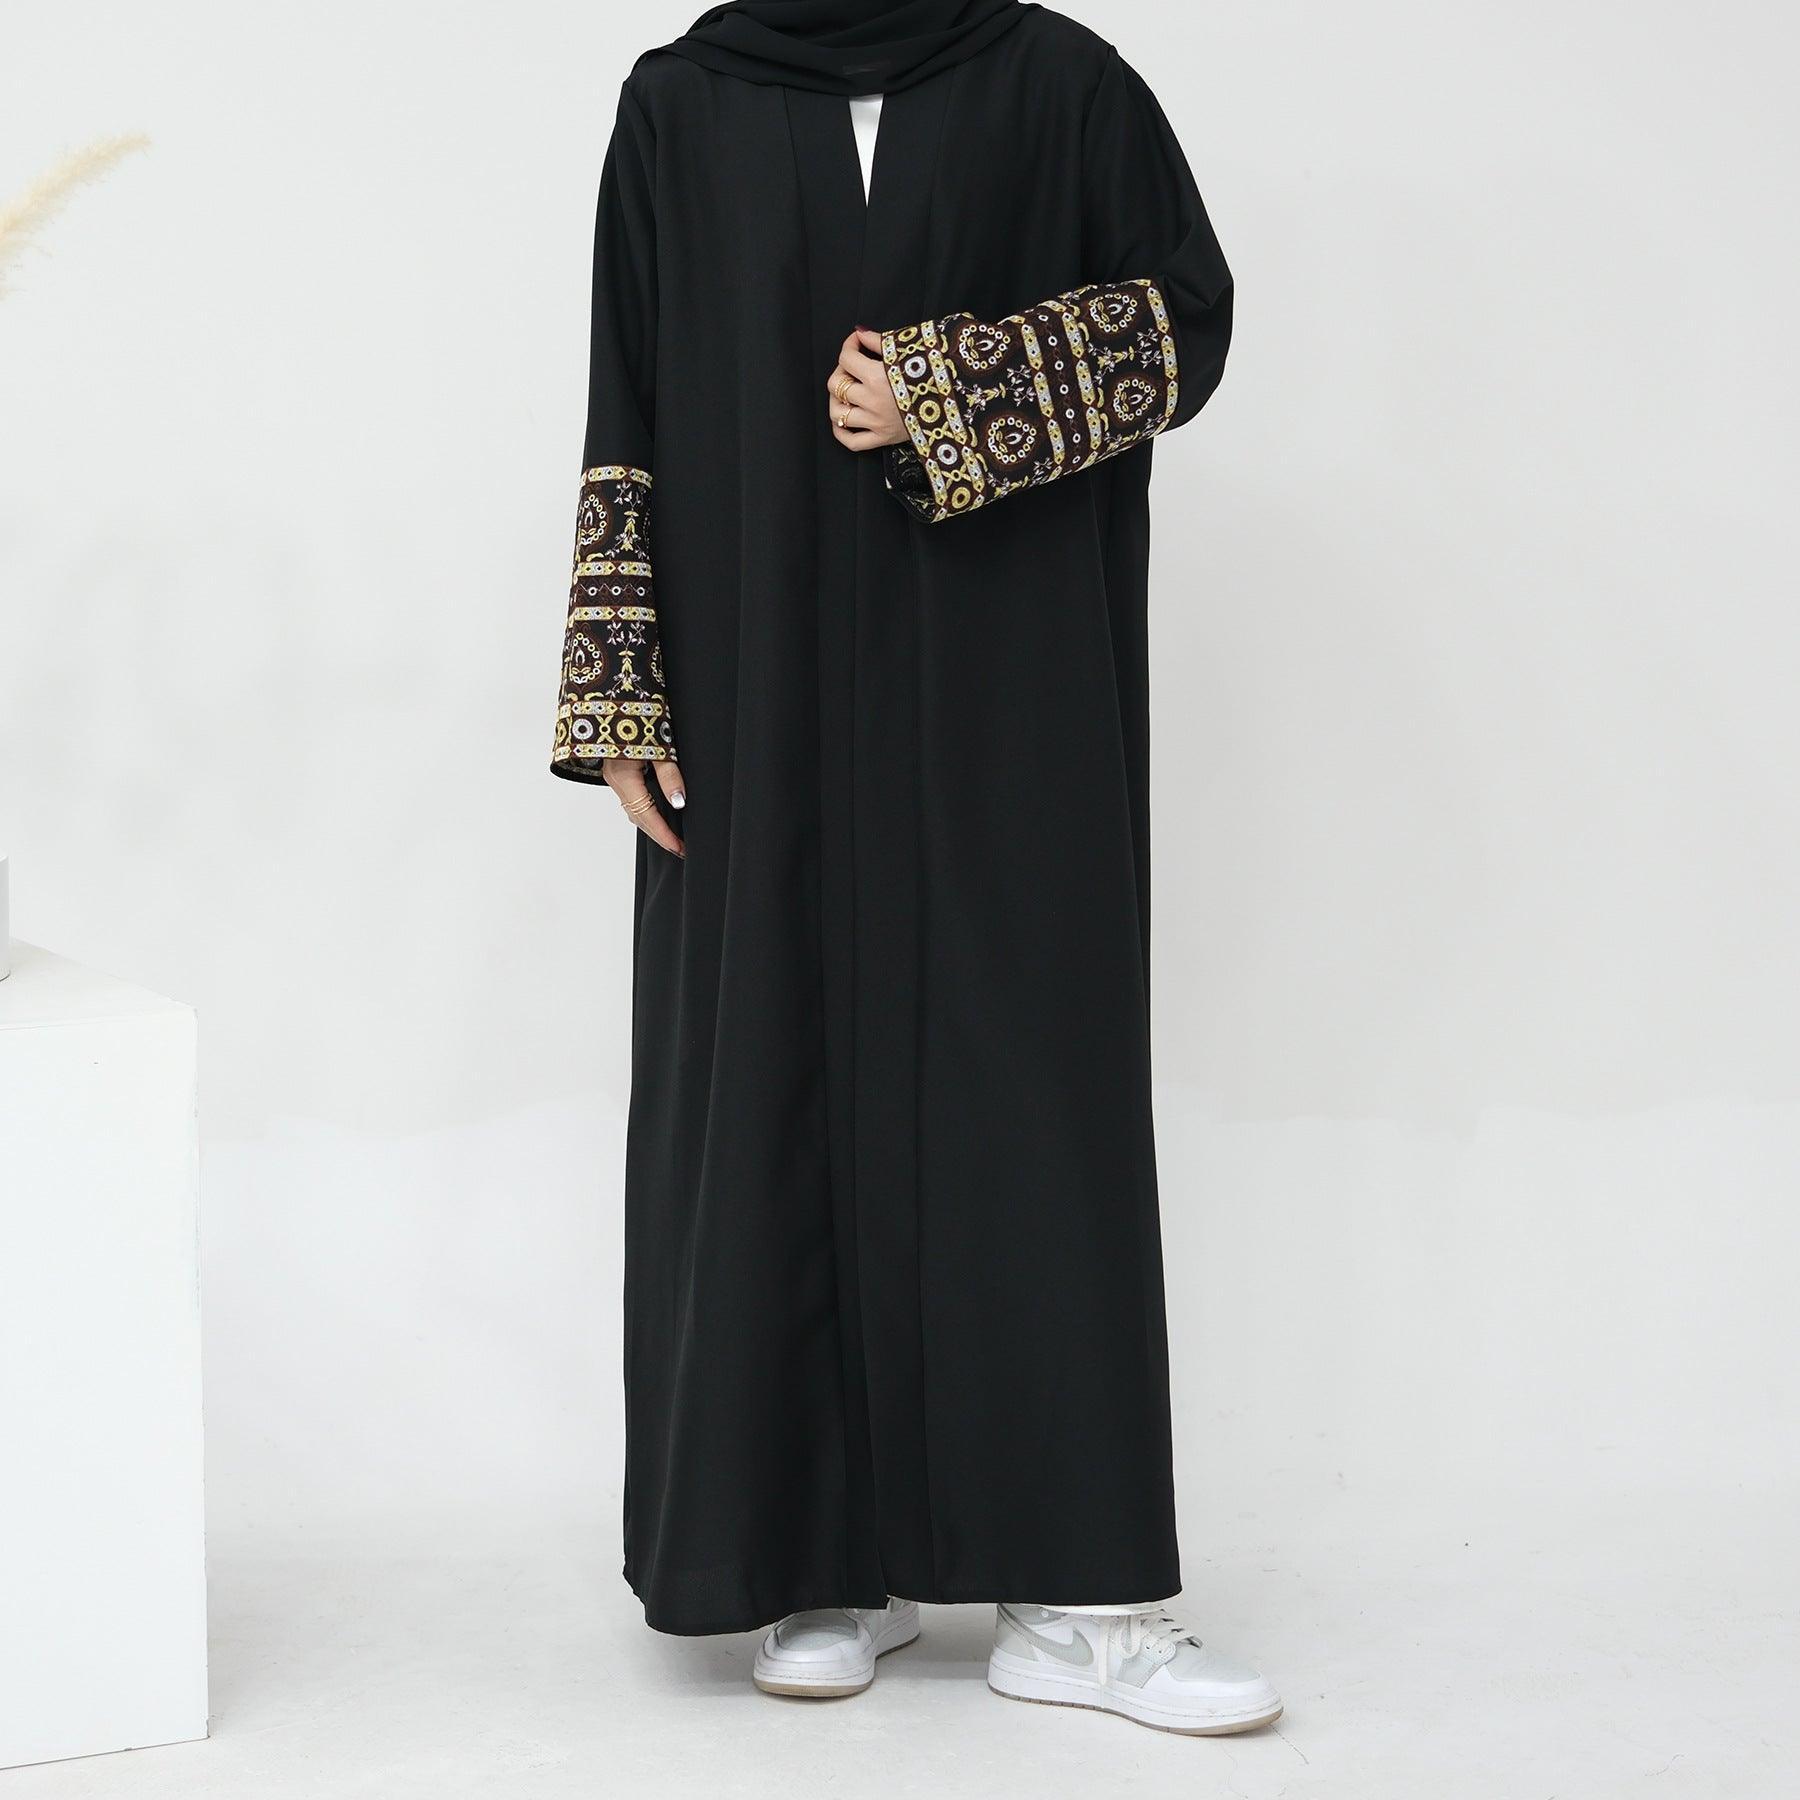 MOA039 Exquisite Embroidery Open Abaya With Chiffon Hijab Set - Mariam's Collection